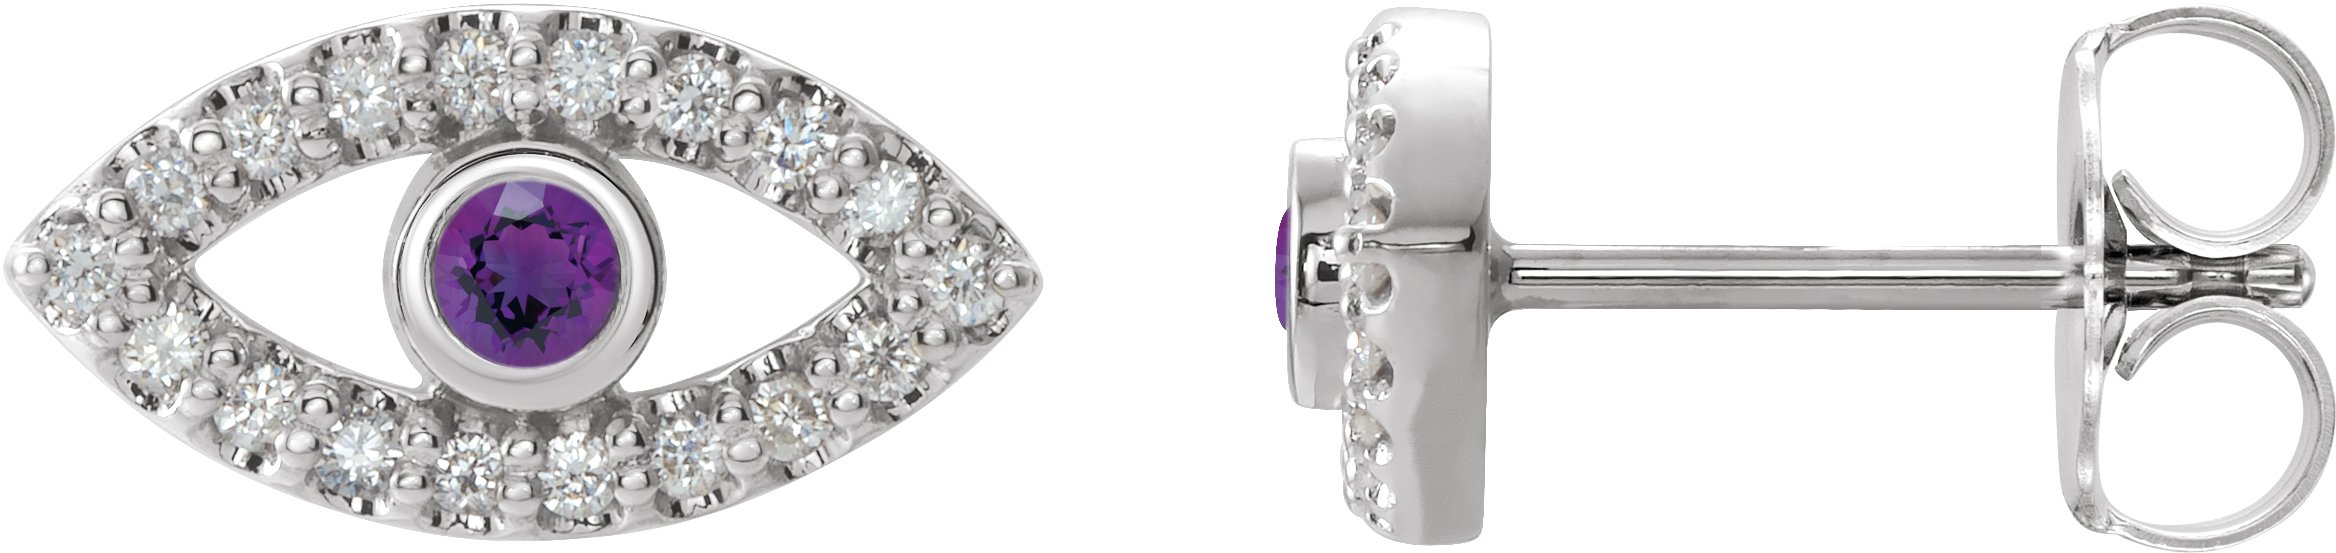 Sterling Silver Amethyst and White Sapphire Earrings Ref. 15594053